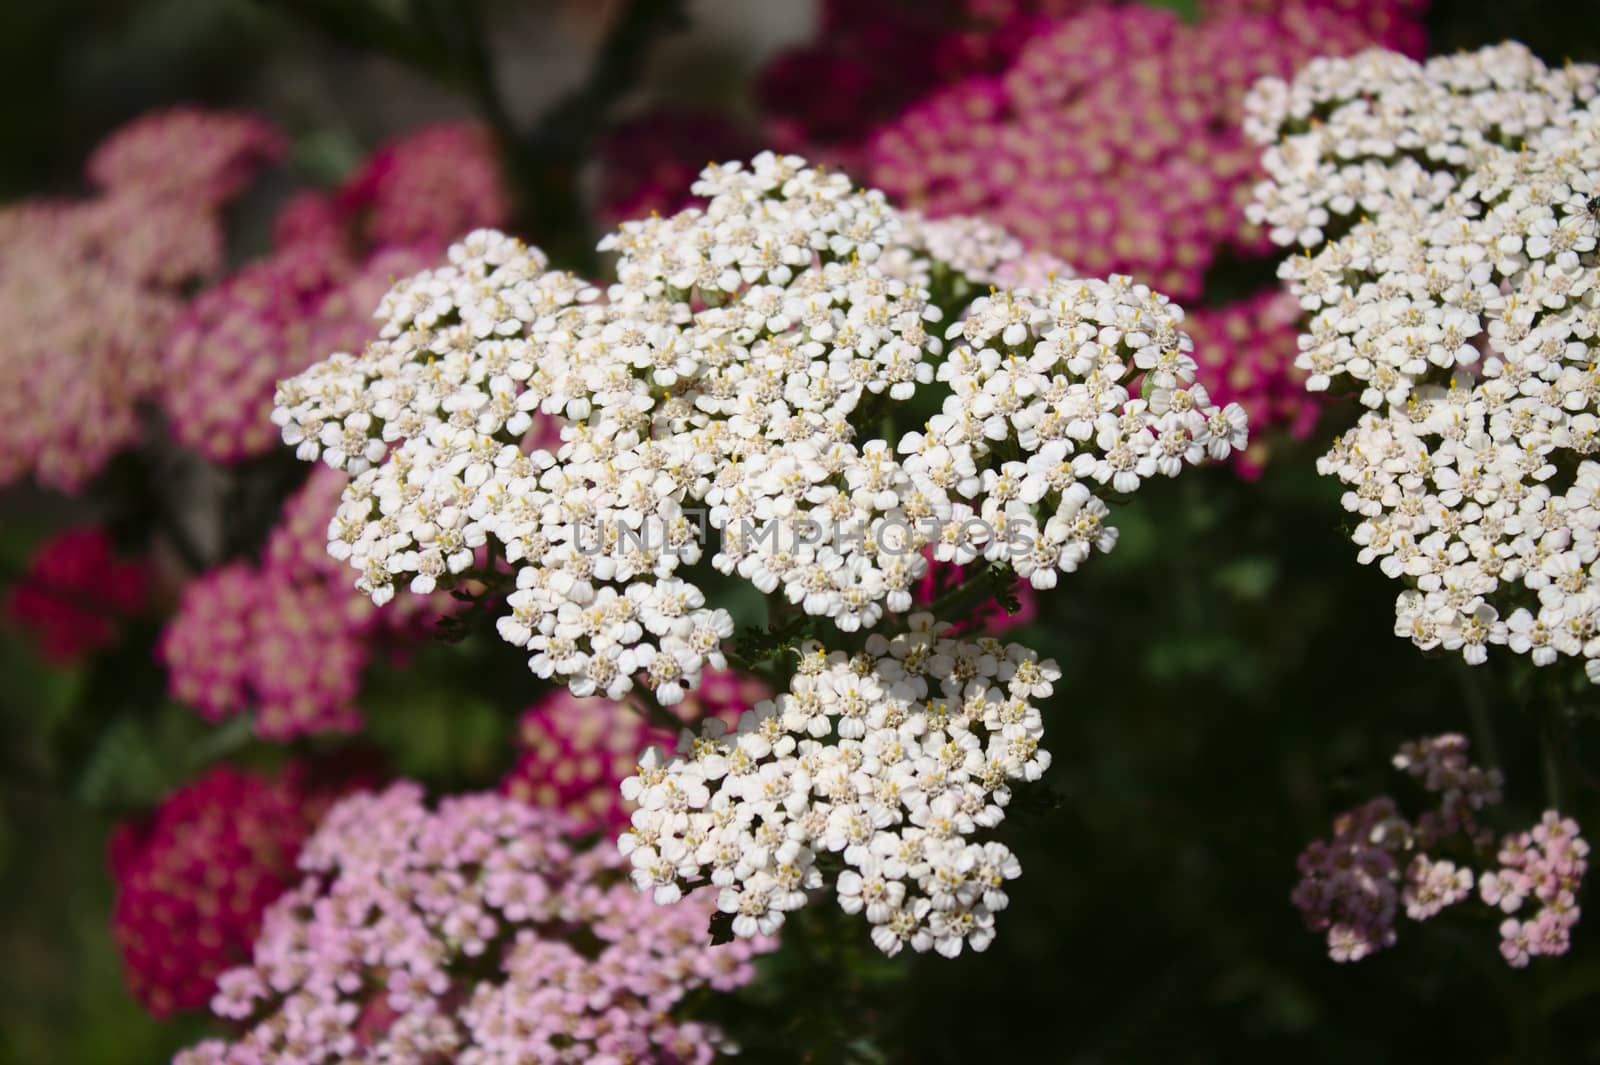 The picture shows a pink and white blossoming yarrow in the garden